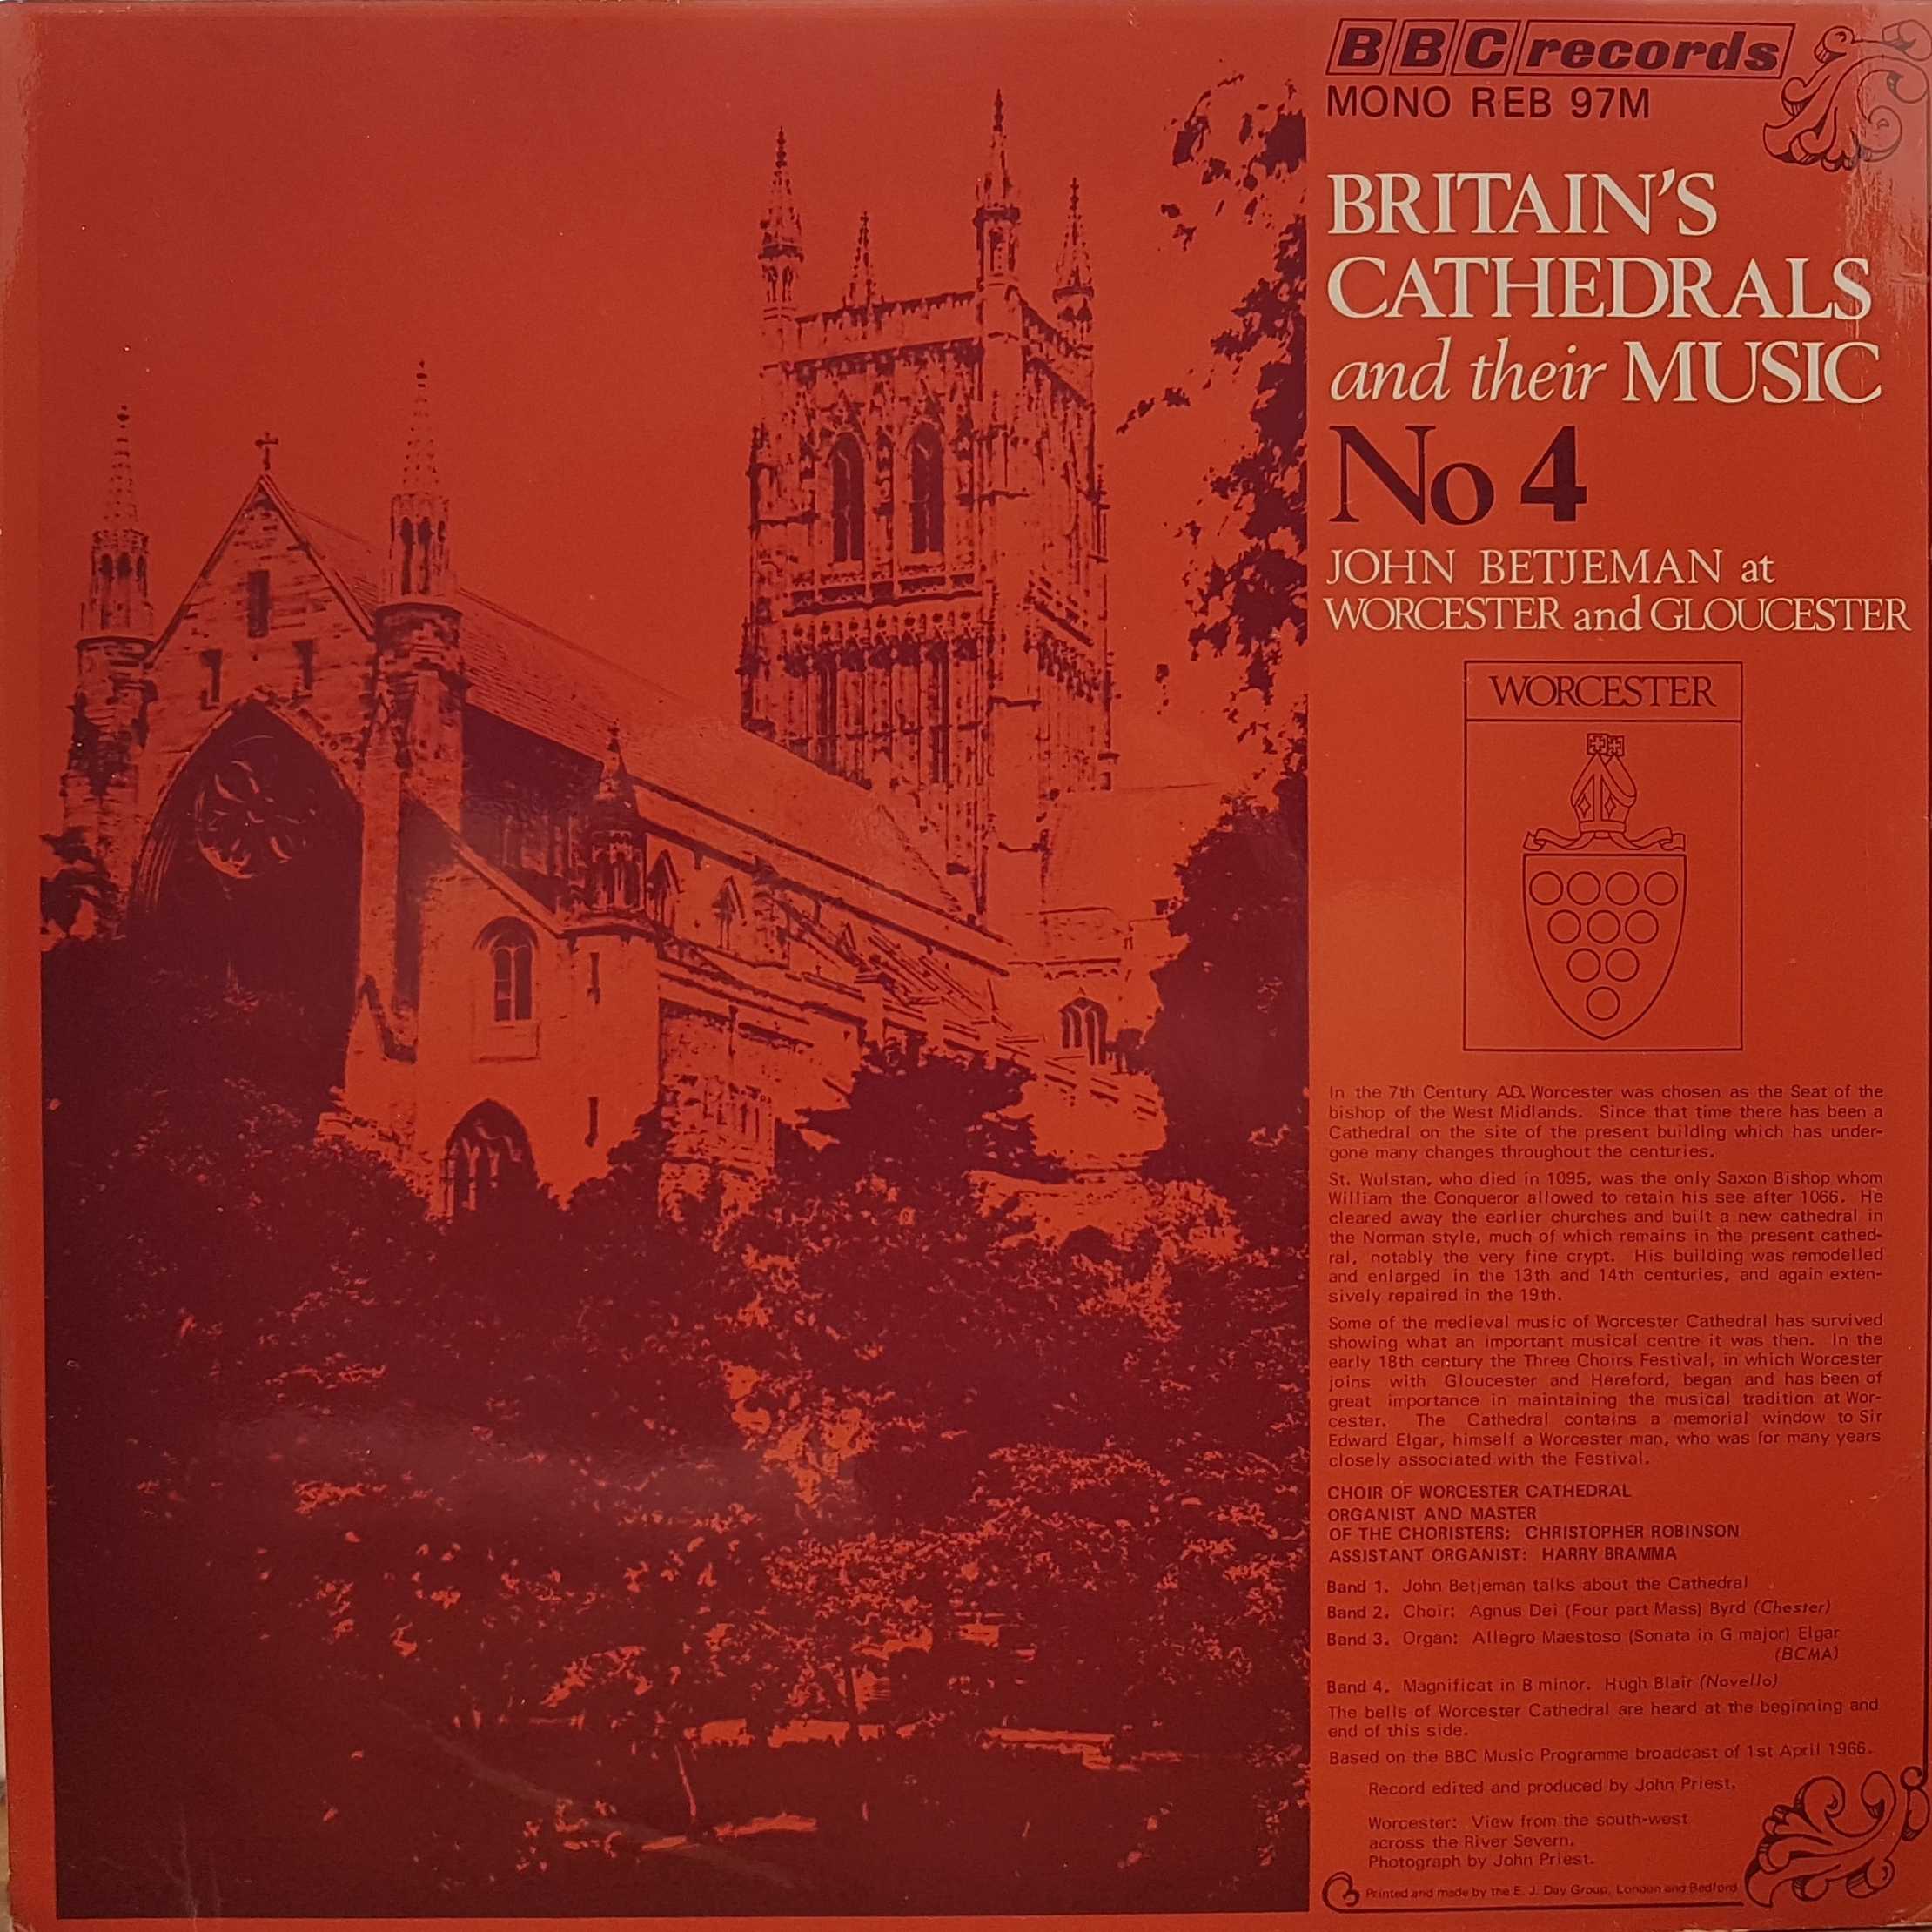 Picture of REB 97 Britain's cathedrals and their music no. 4 - Worcester / Gloucester by artist John Betjeman from the BBC records and Tapes library